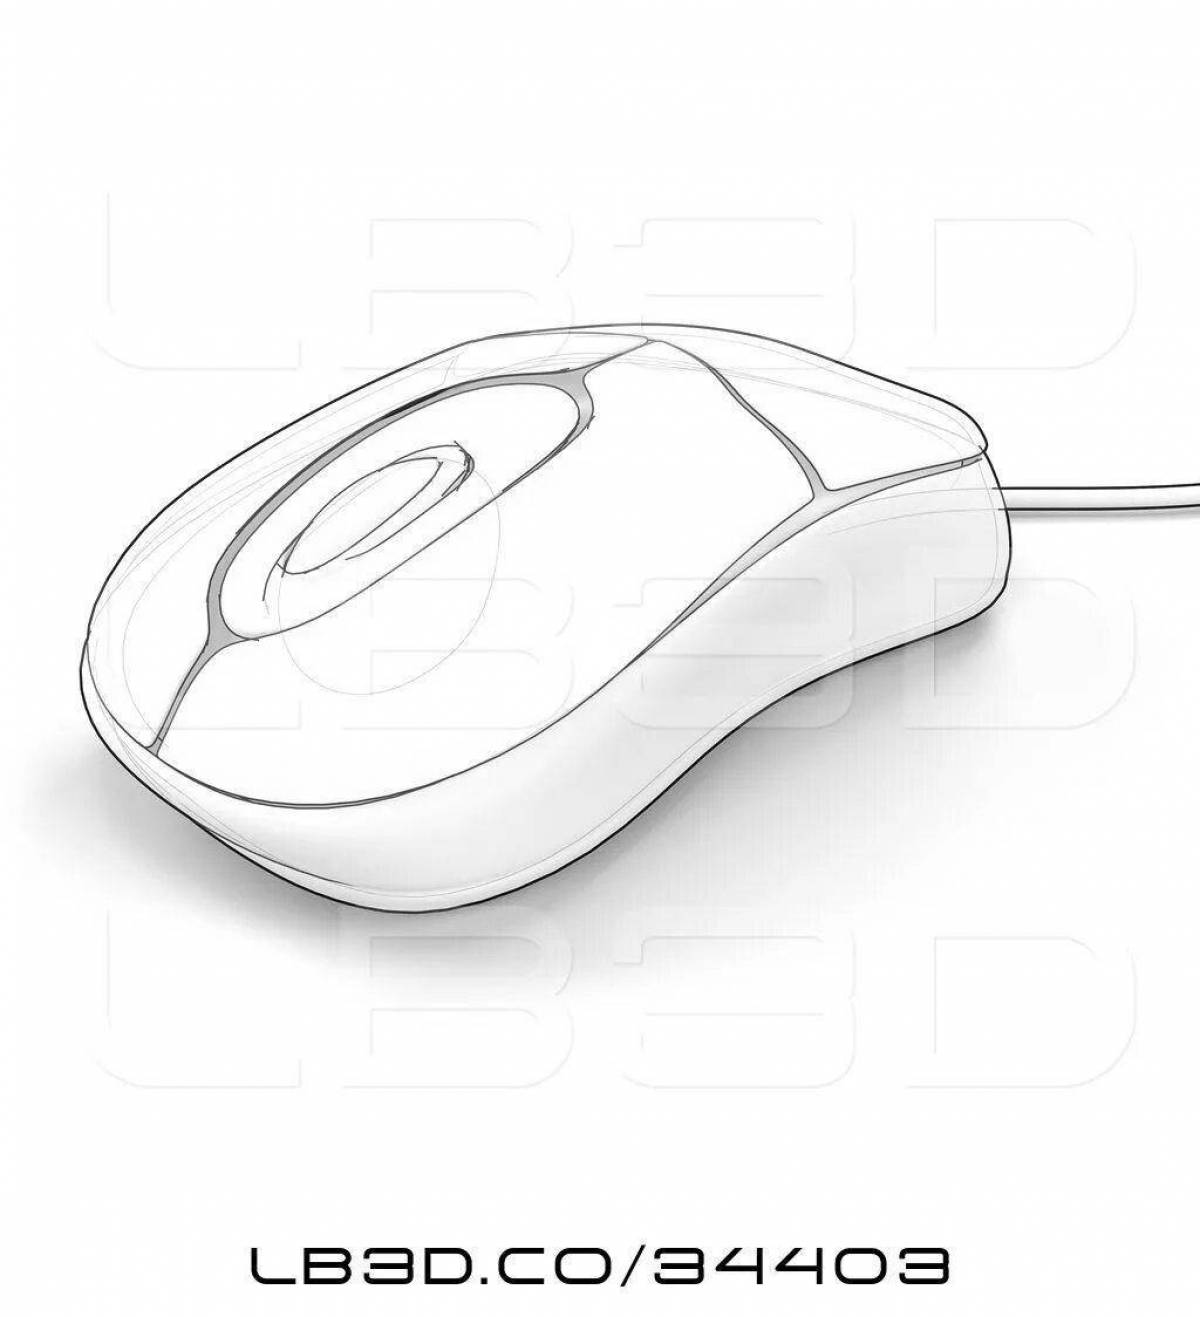 Computer mouse #5